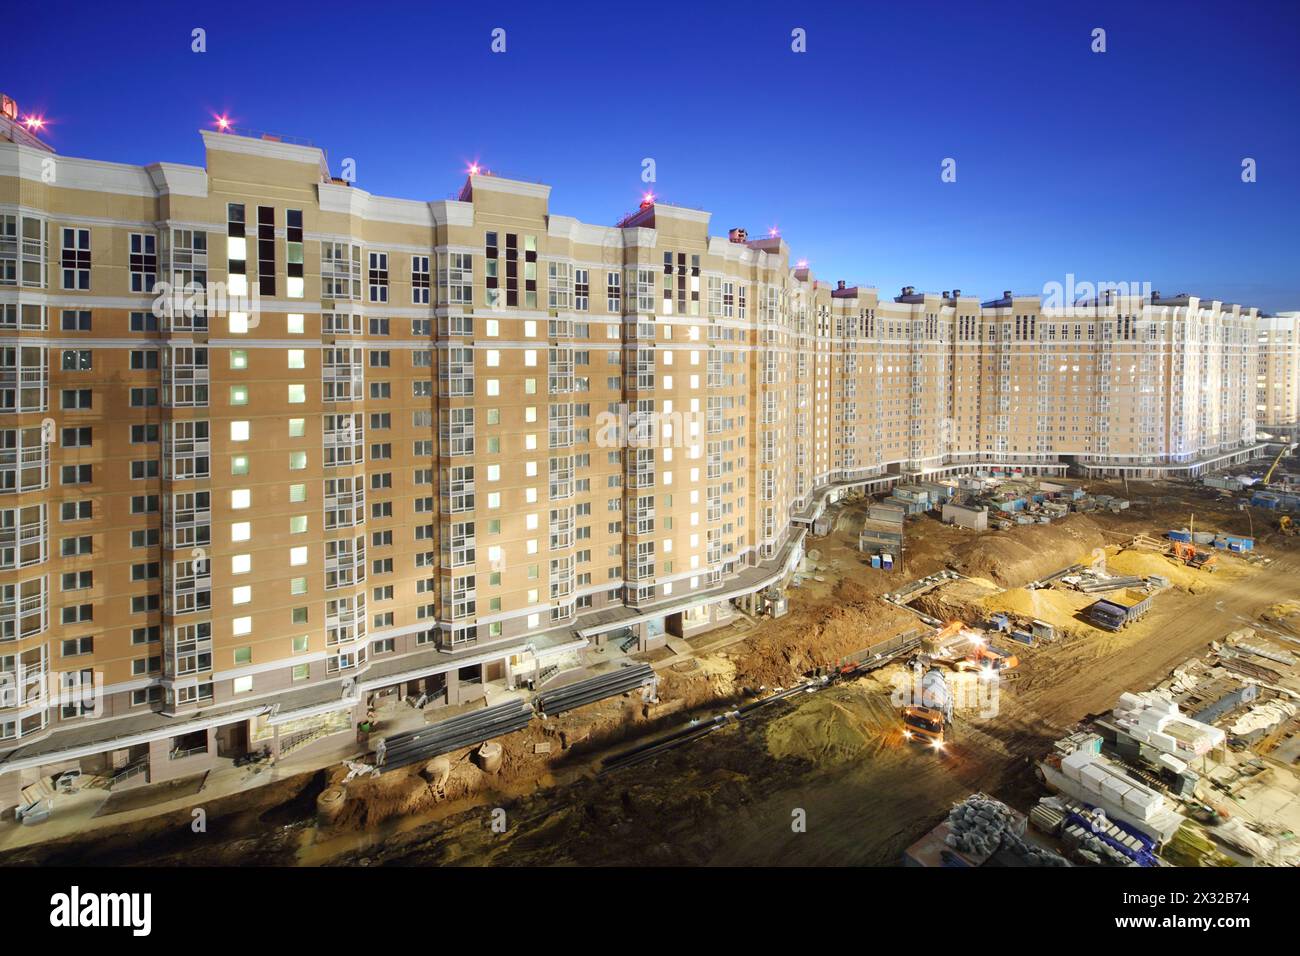 Long high multi-storey building under construction at night. Stock Photo